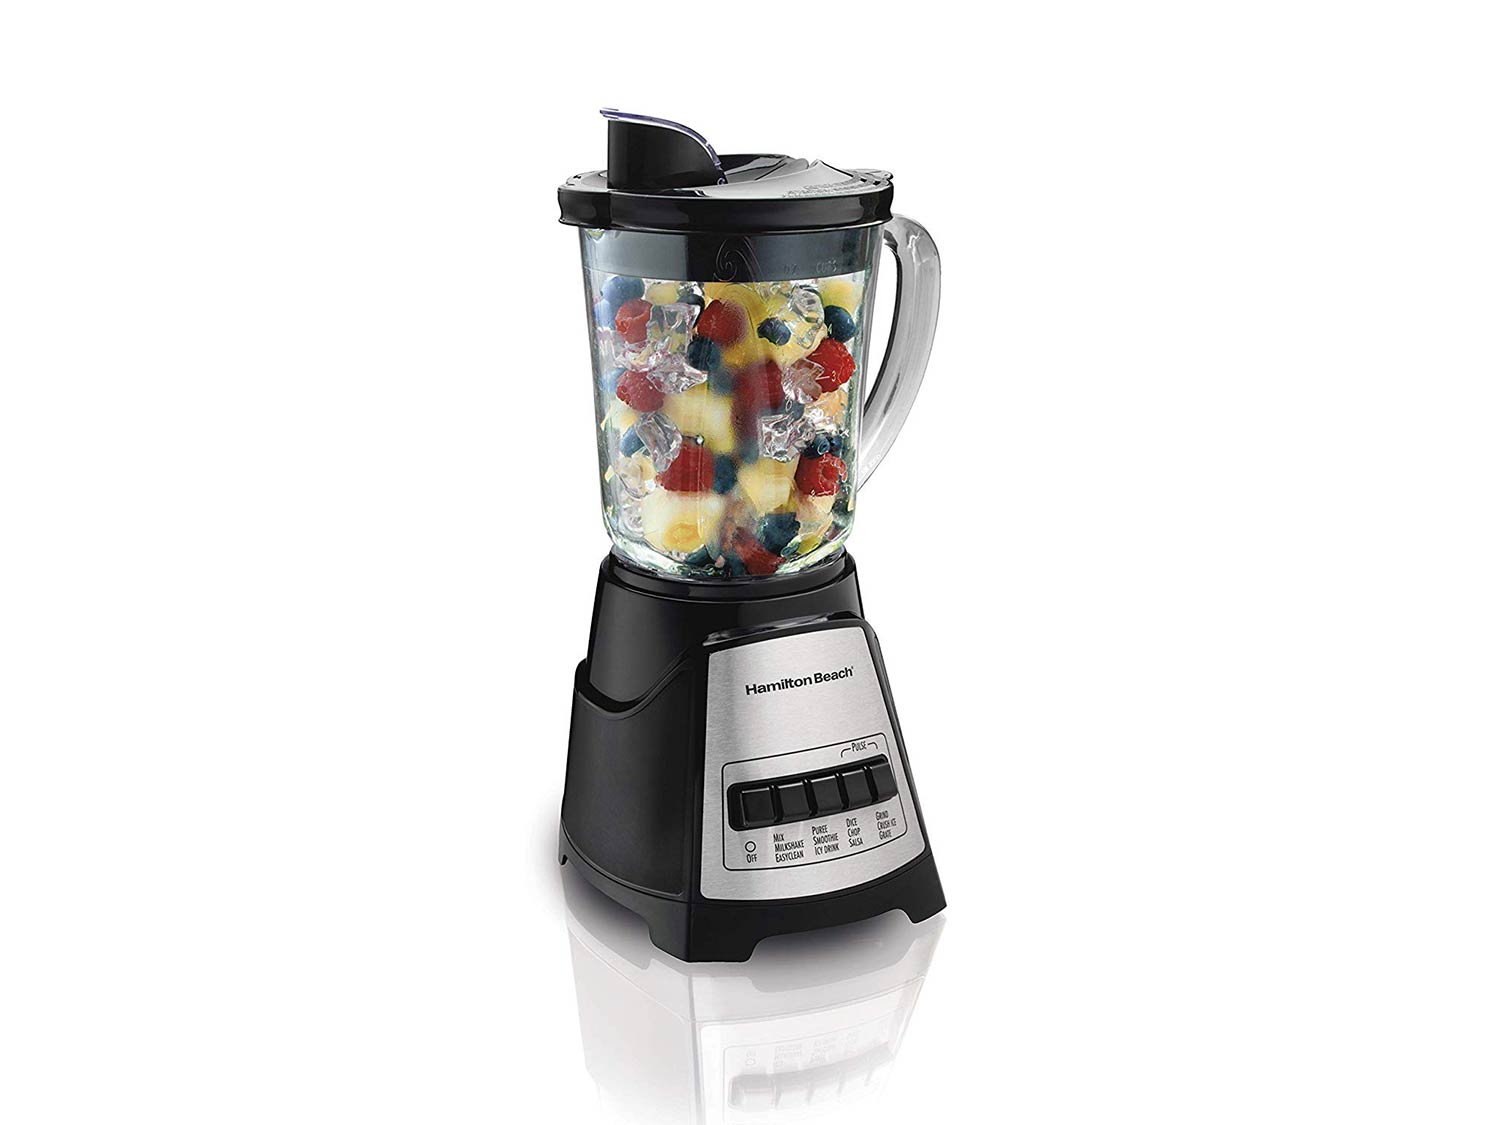 Hamilton Beach Power Elite Blender with 12 Functions for Puree, Ice Crush, Shakes and Smoothies and 40 Oz BPA Free Glass Jar, Black and Stainless Steel